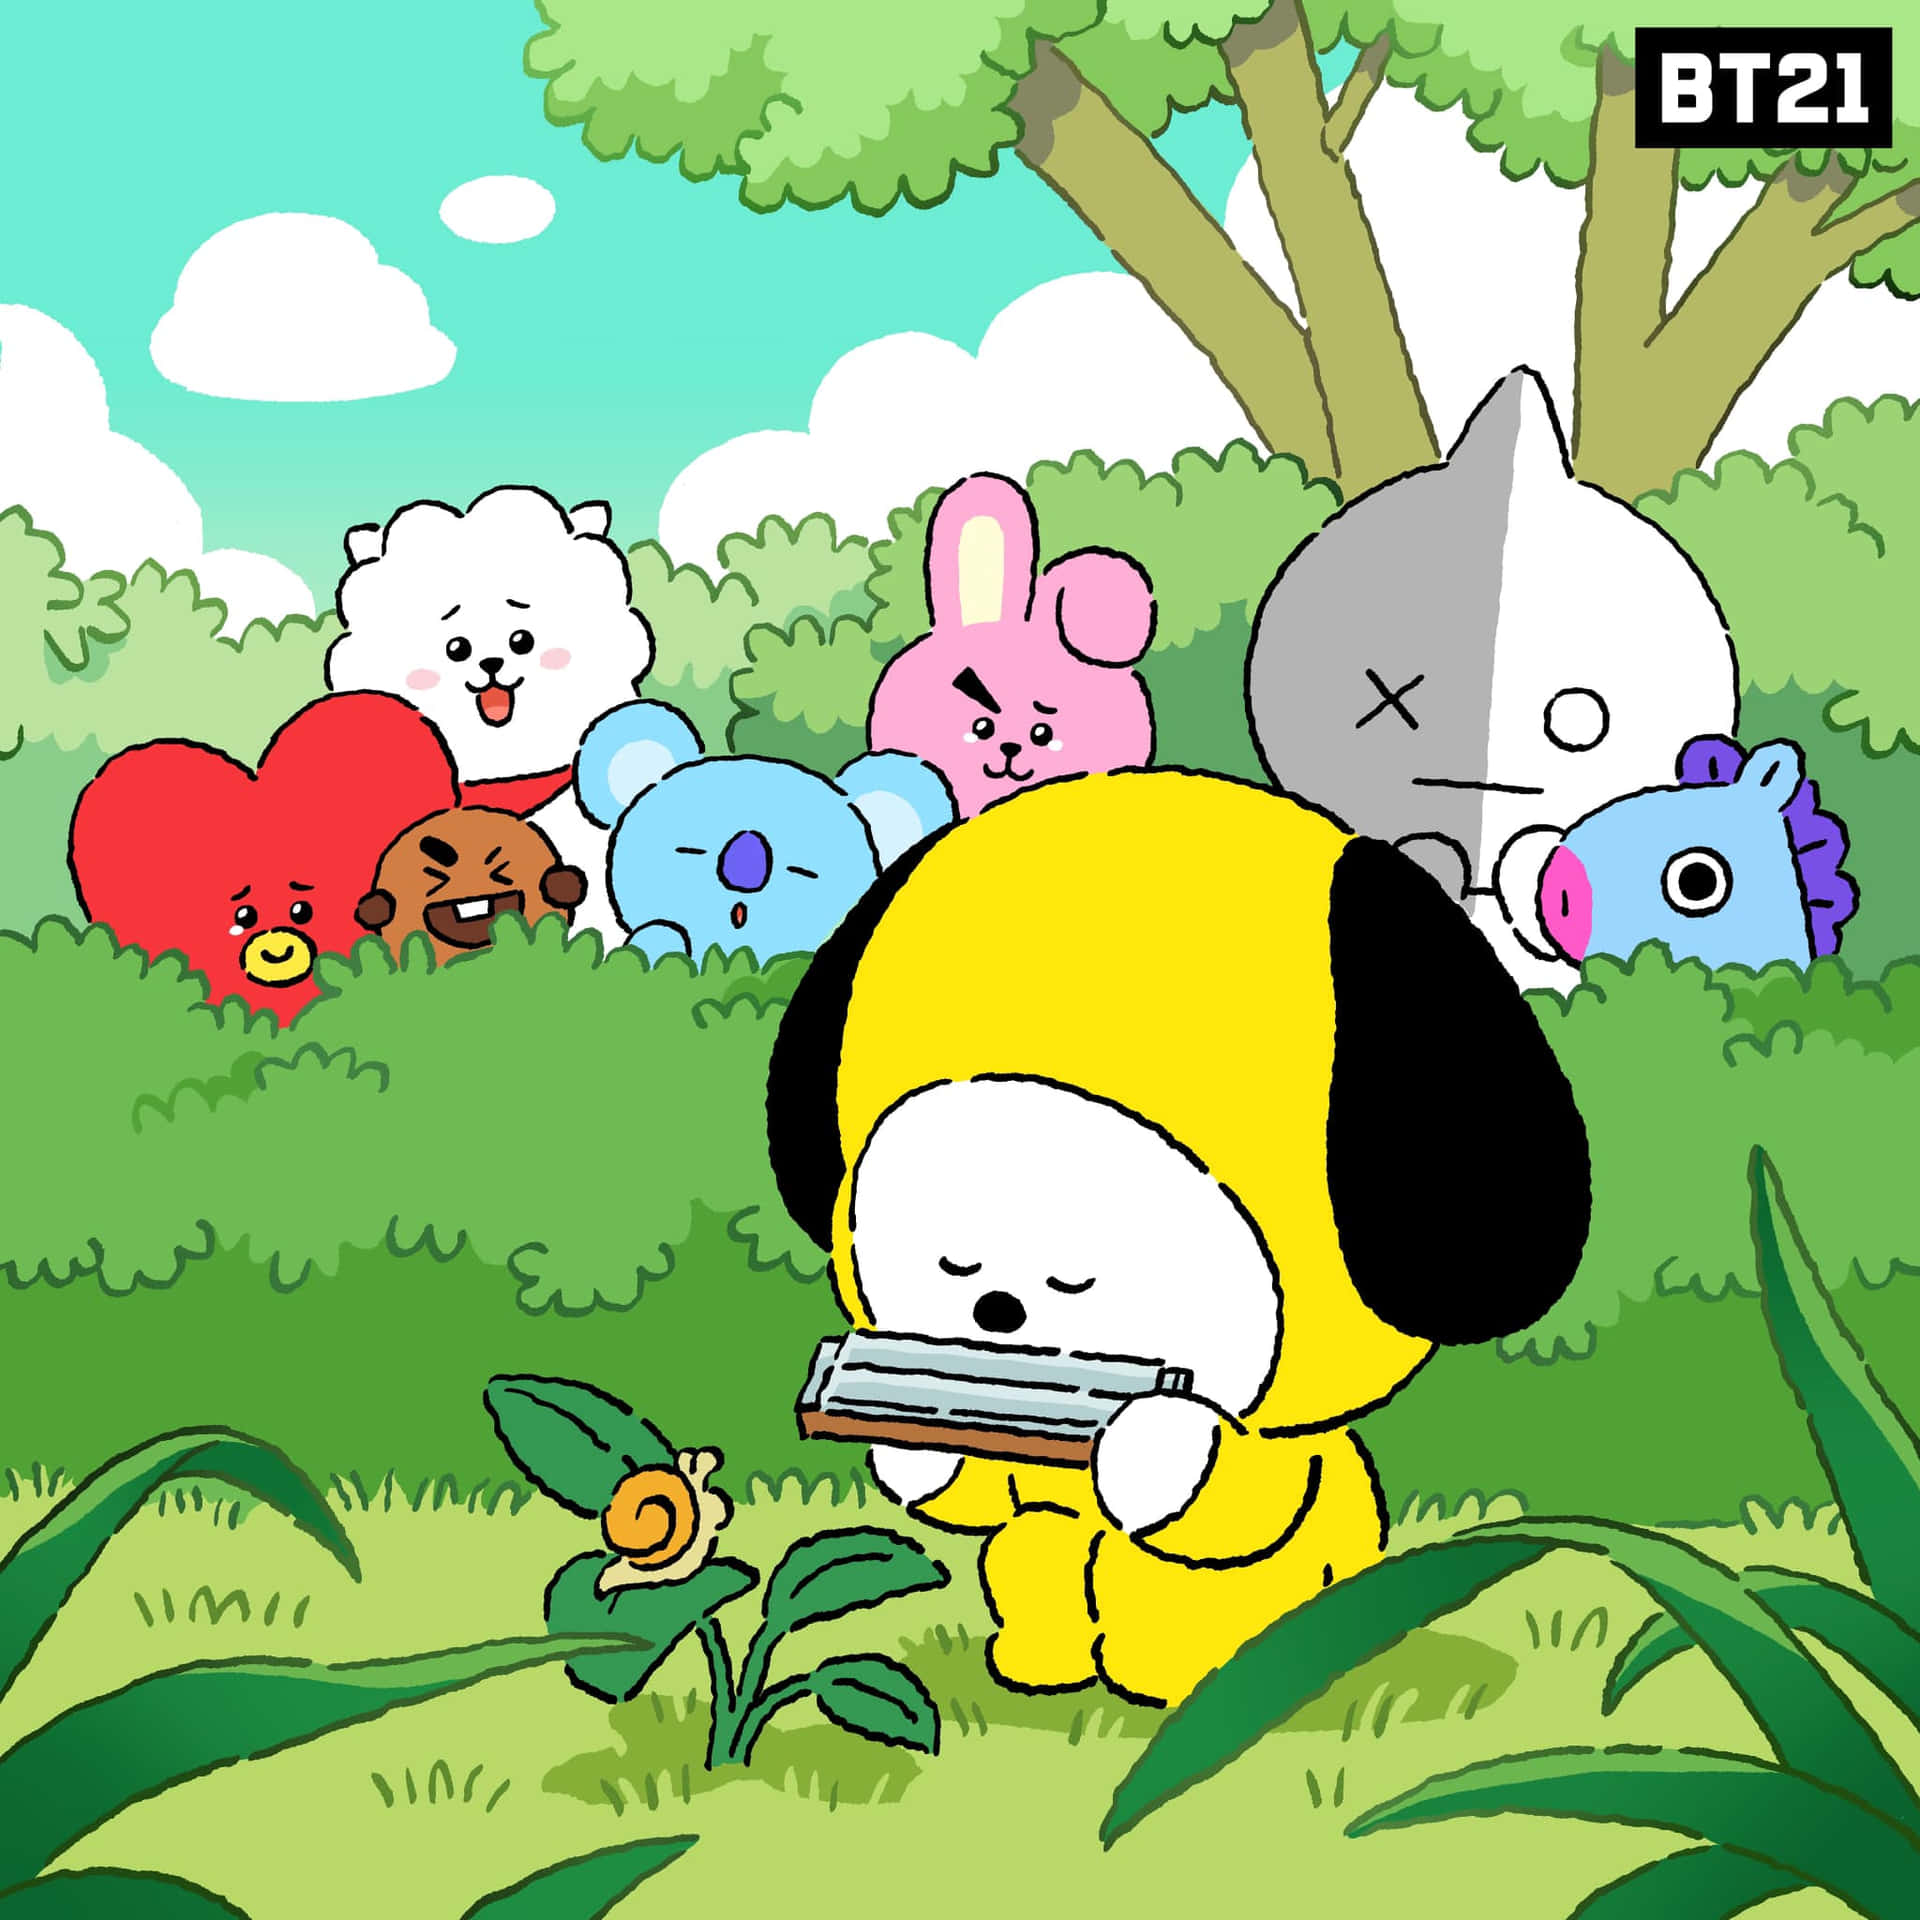 Caption: The BT21 Gang in Stunning High Resolution